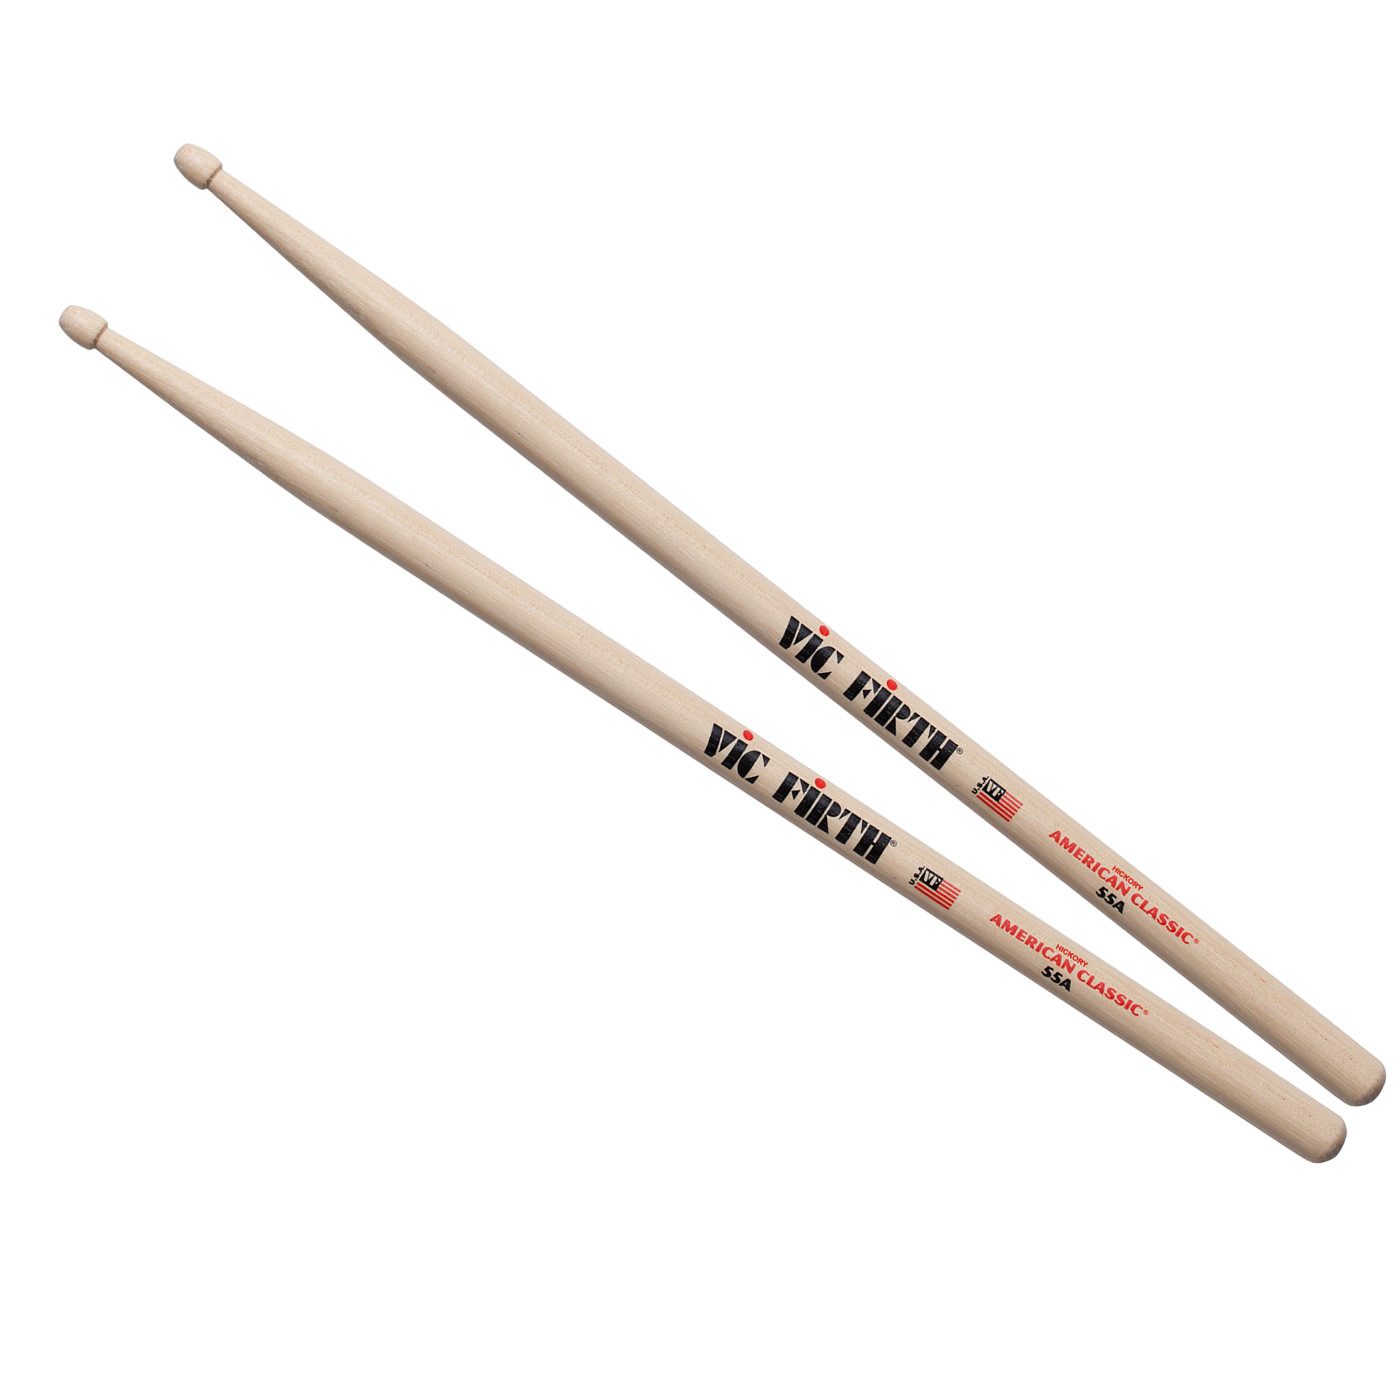 VIC FIRTH AMERICAN CLASSIC HICKORY 55A